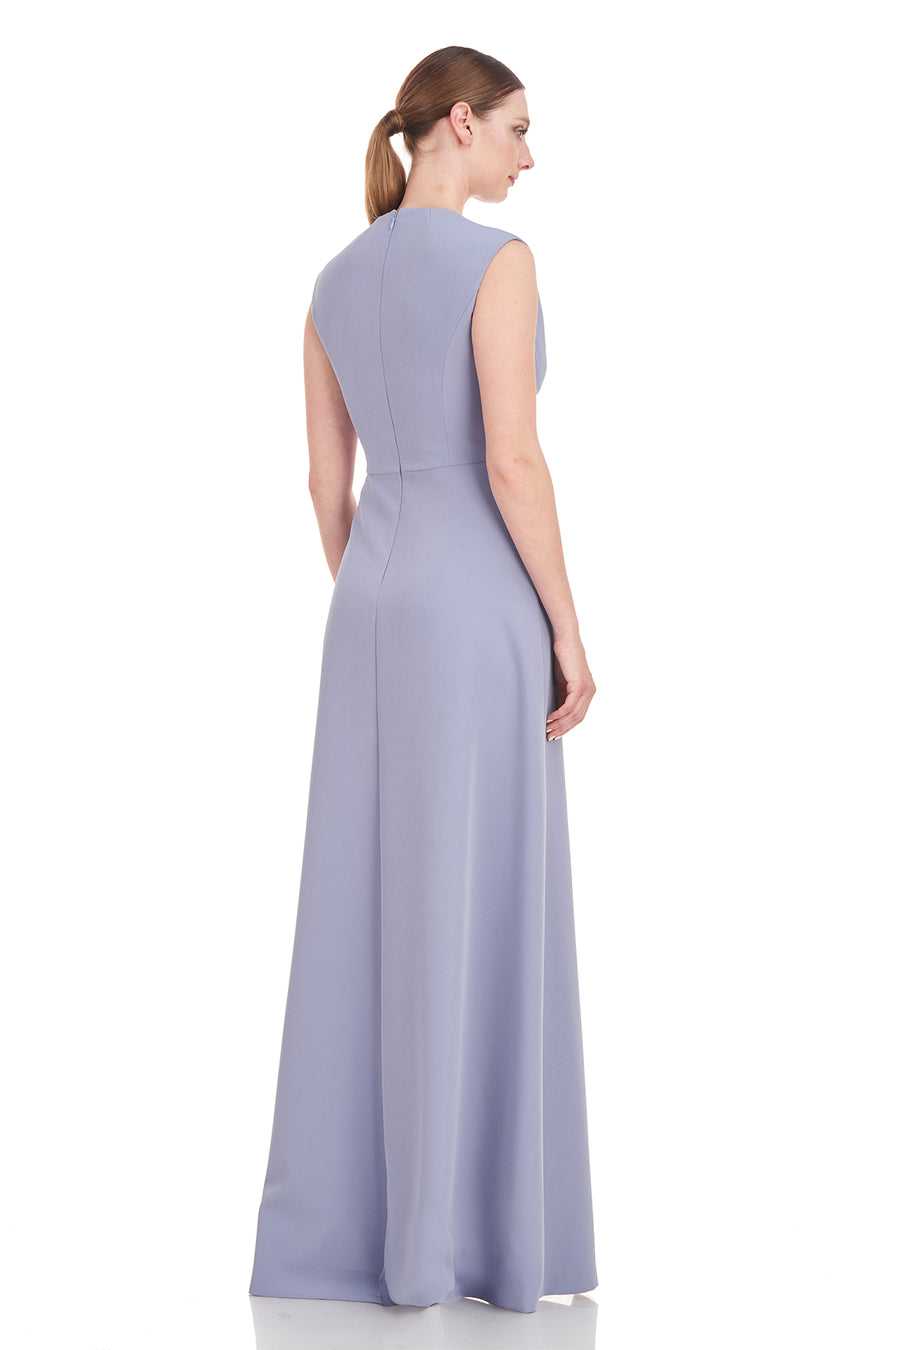 Melora Gown